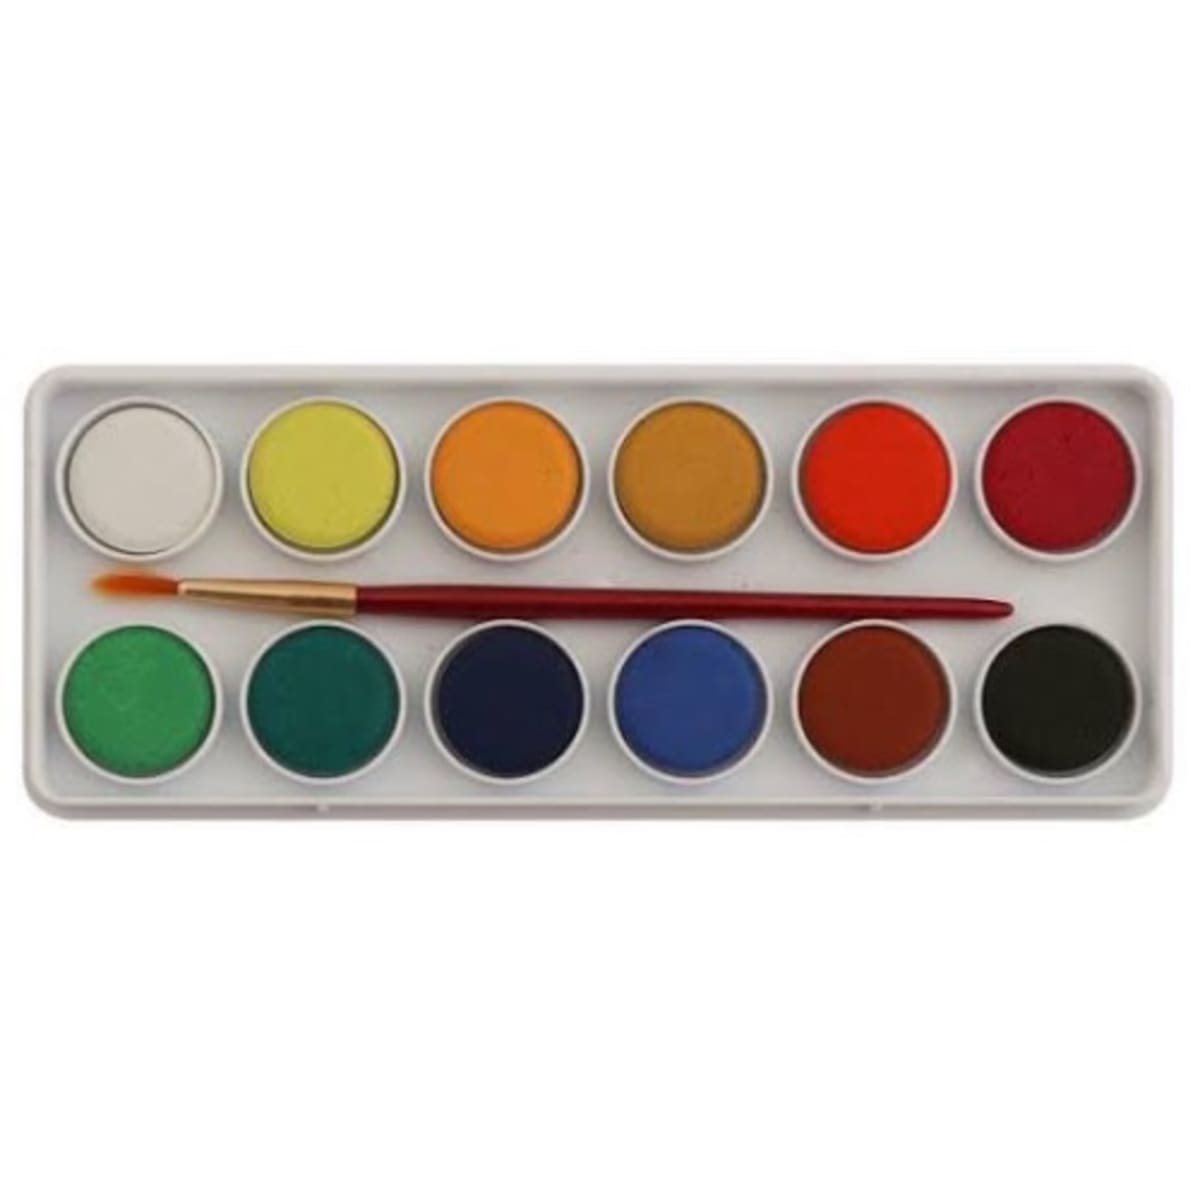 Water Color In 12 Colors - 1 Piece